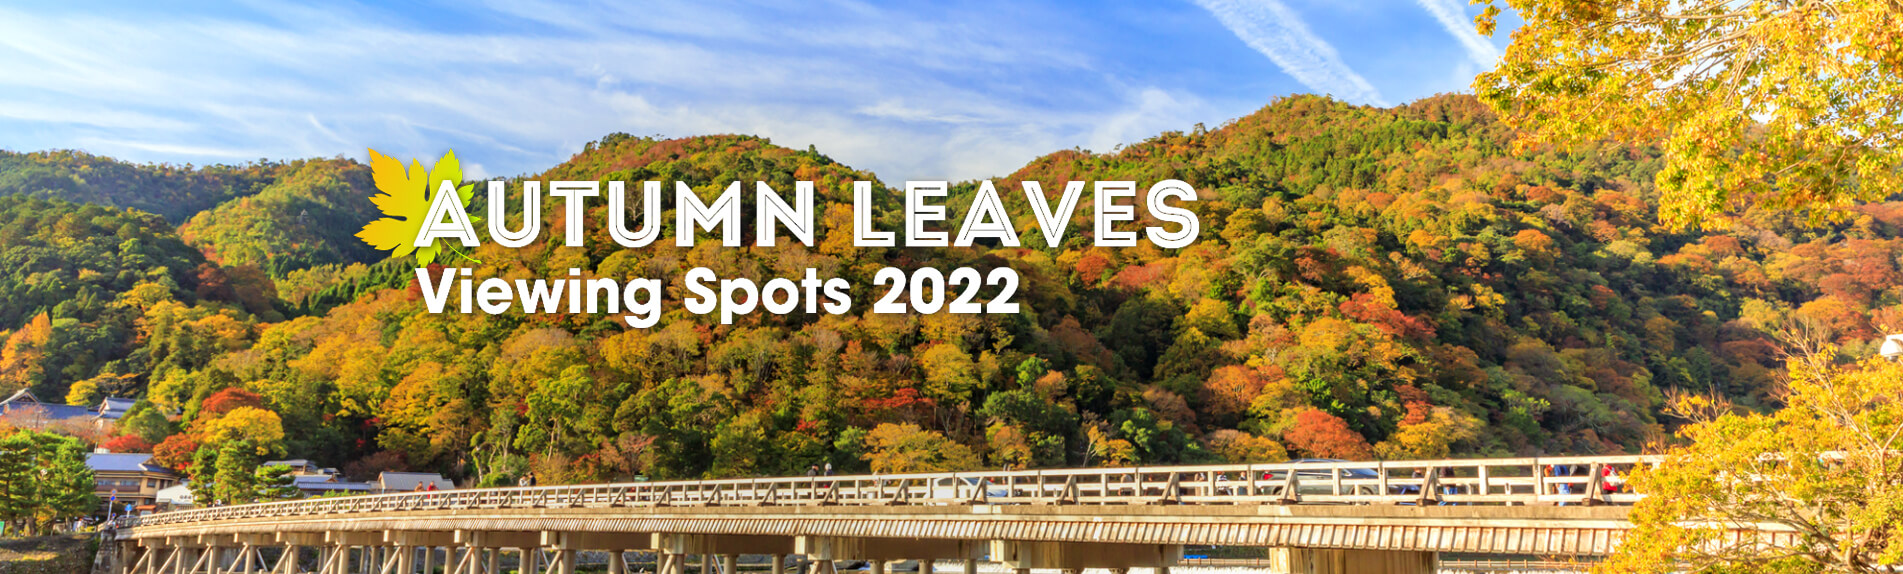 Autumn Leaves Viewing Spots 2022